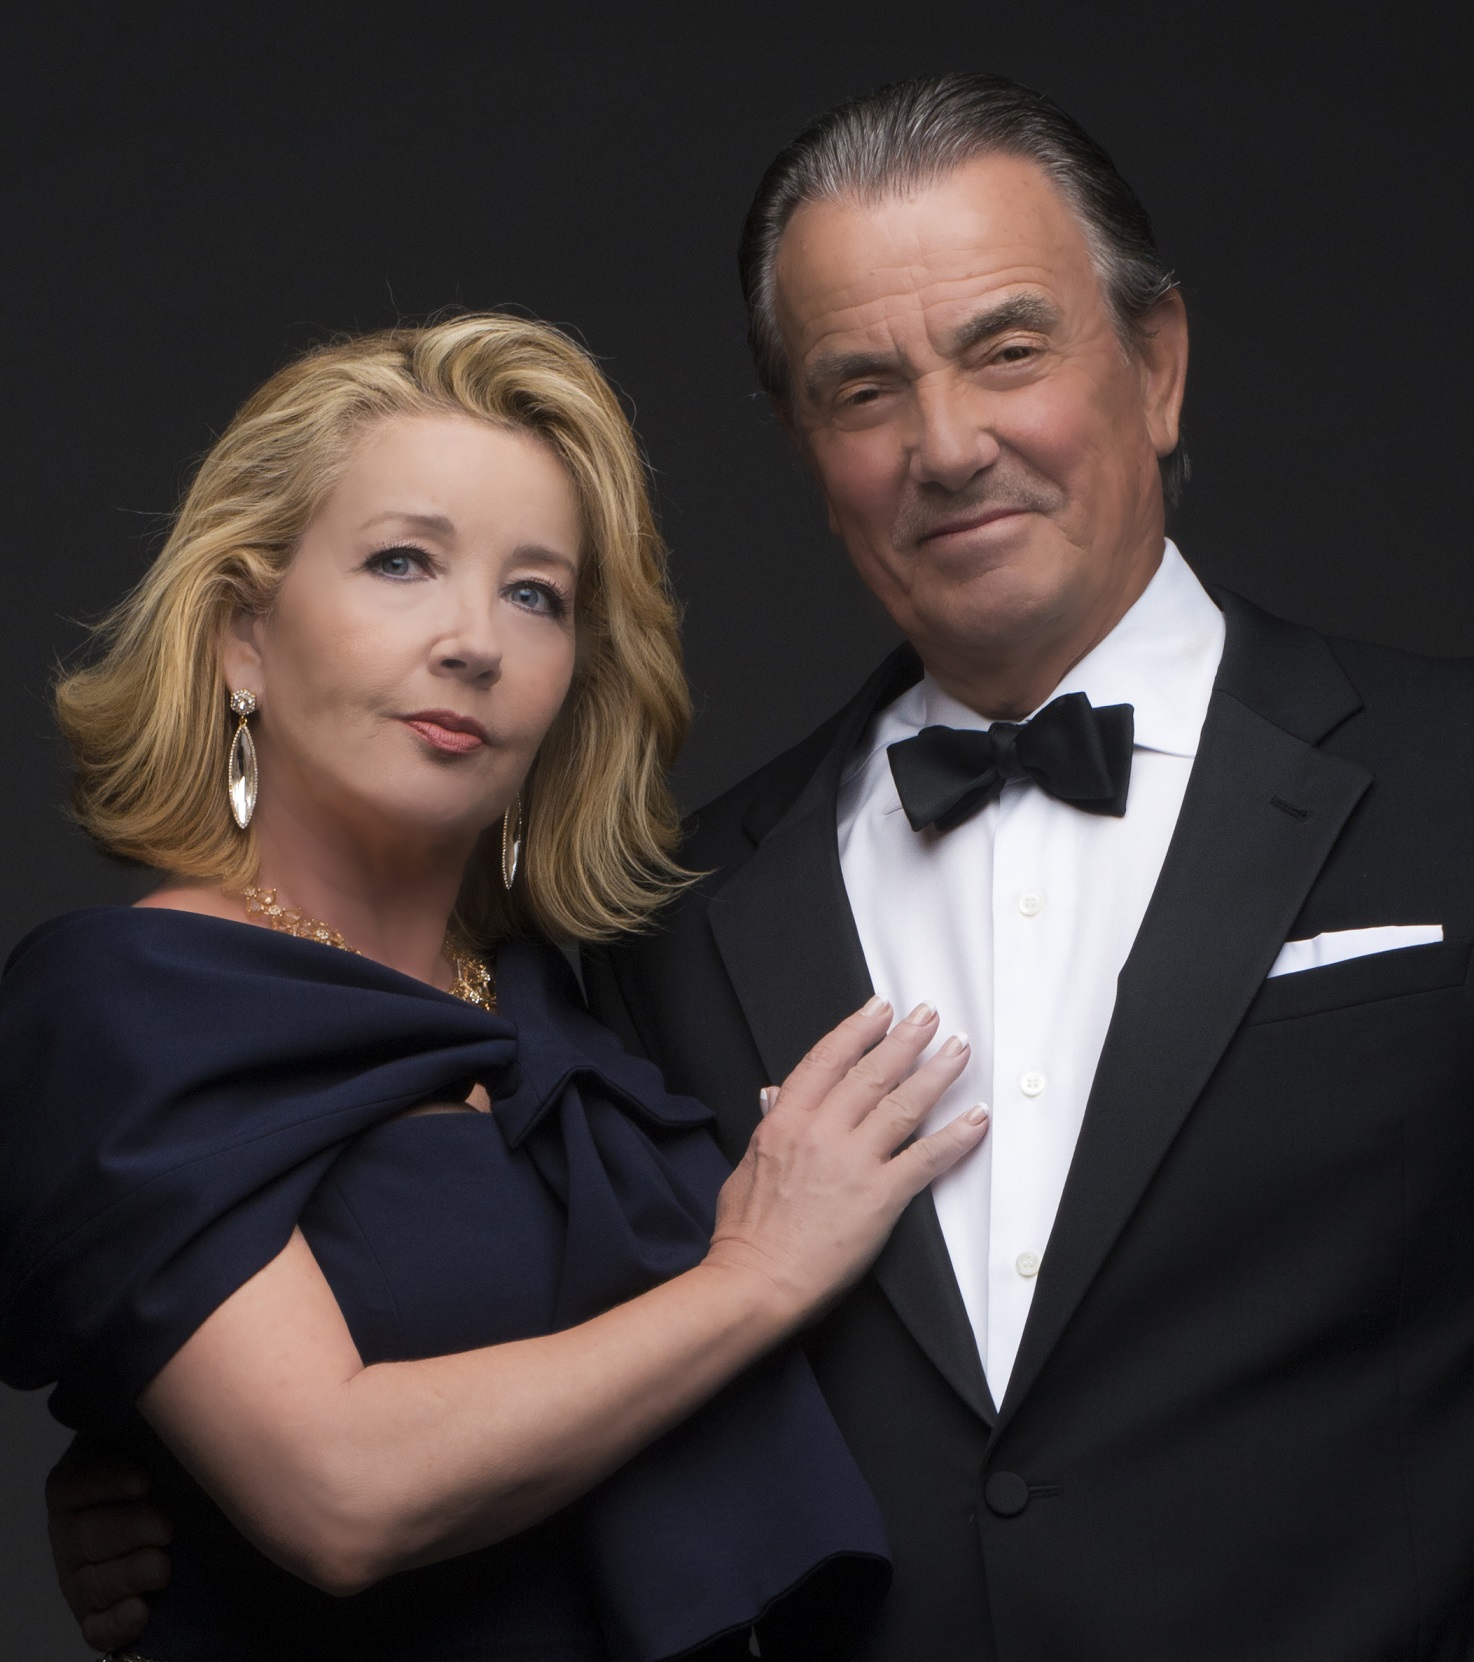 Melody Thomas Scott and Eric Braeden of The Young and the Restless. Credit: Edward McGowan / PlainJoe Studios